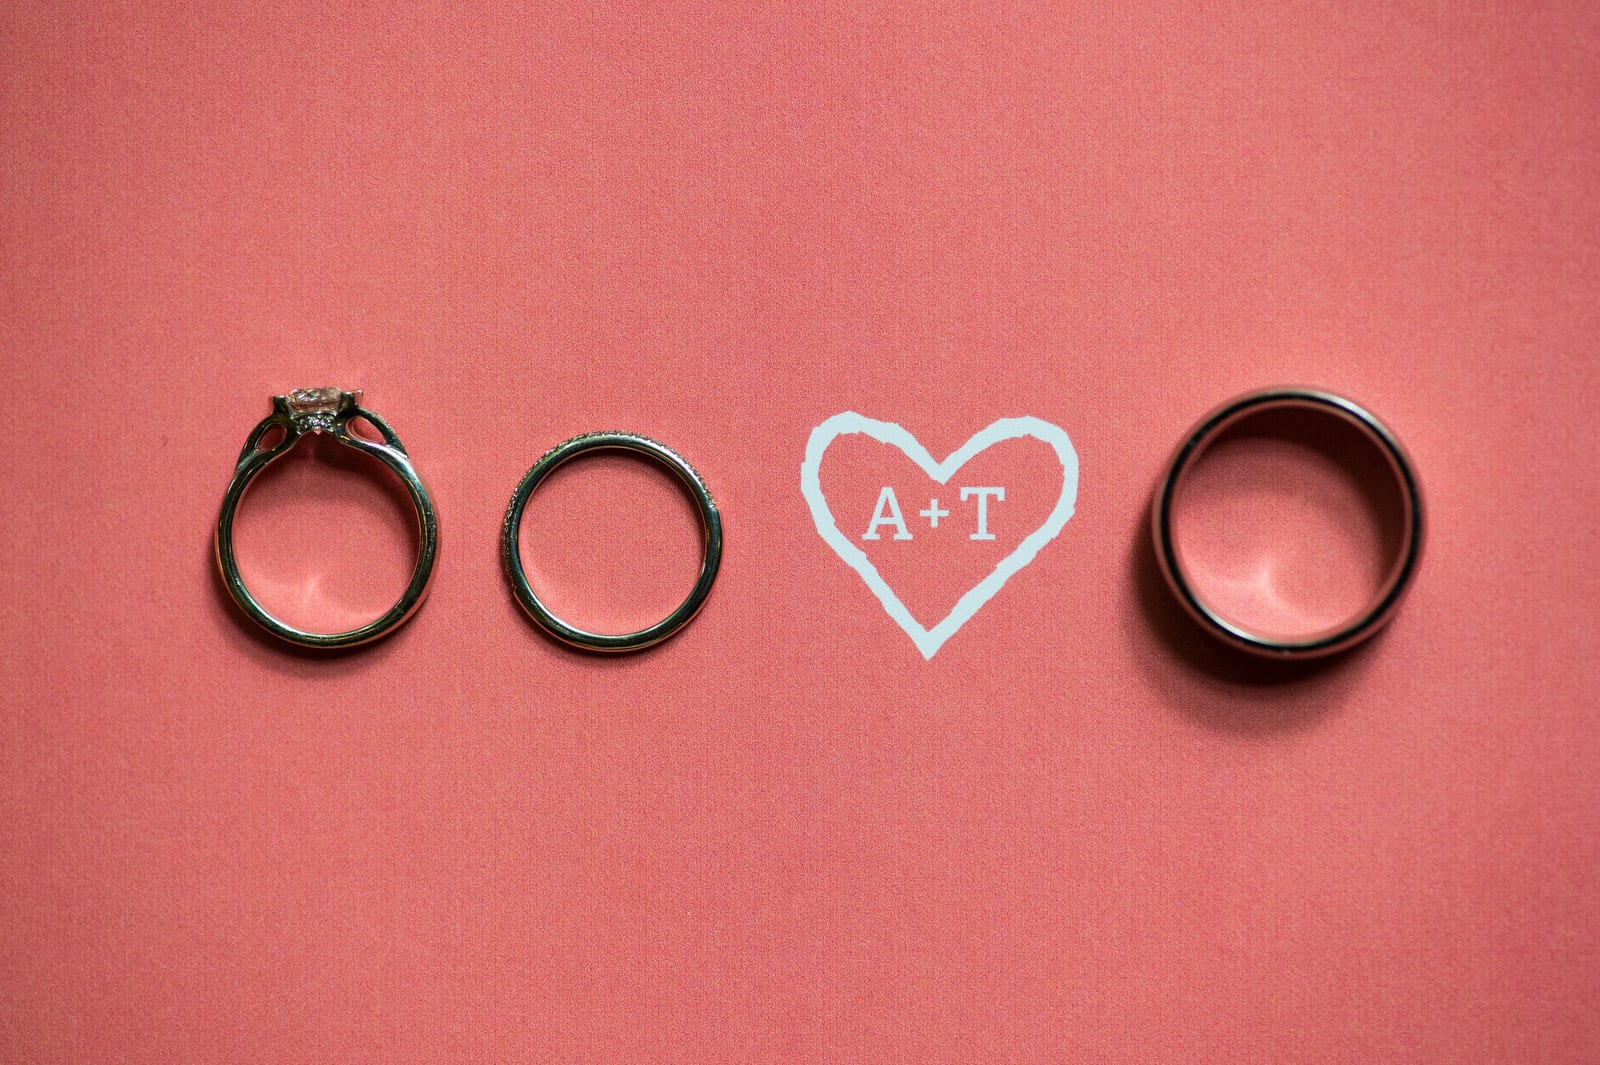 A heart with initials A+T inside of it is printed on salmon-colored cardstock. A couples' wedding bands are arranged next to it during their Hyeholde Wedding Pittsburgh.